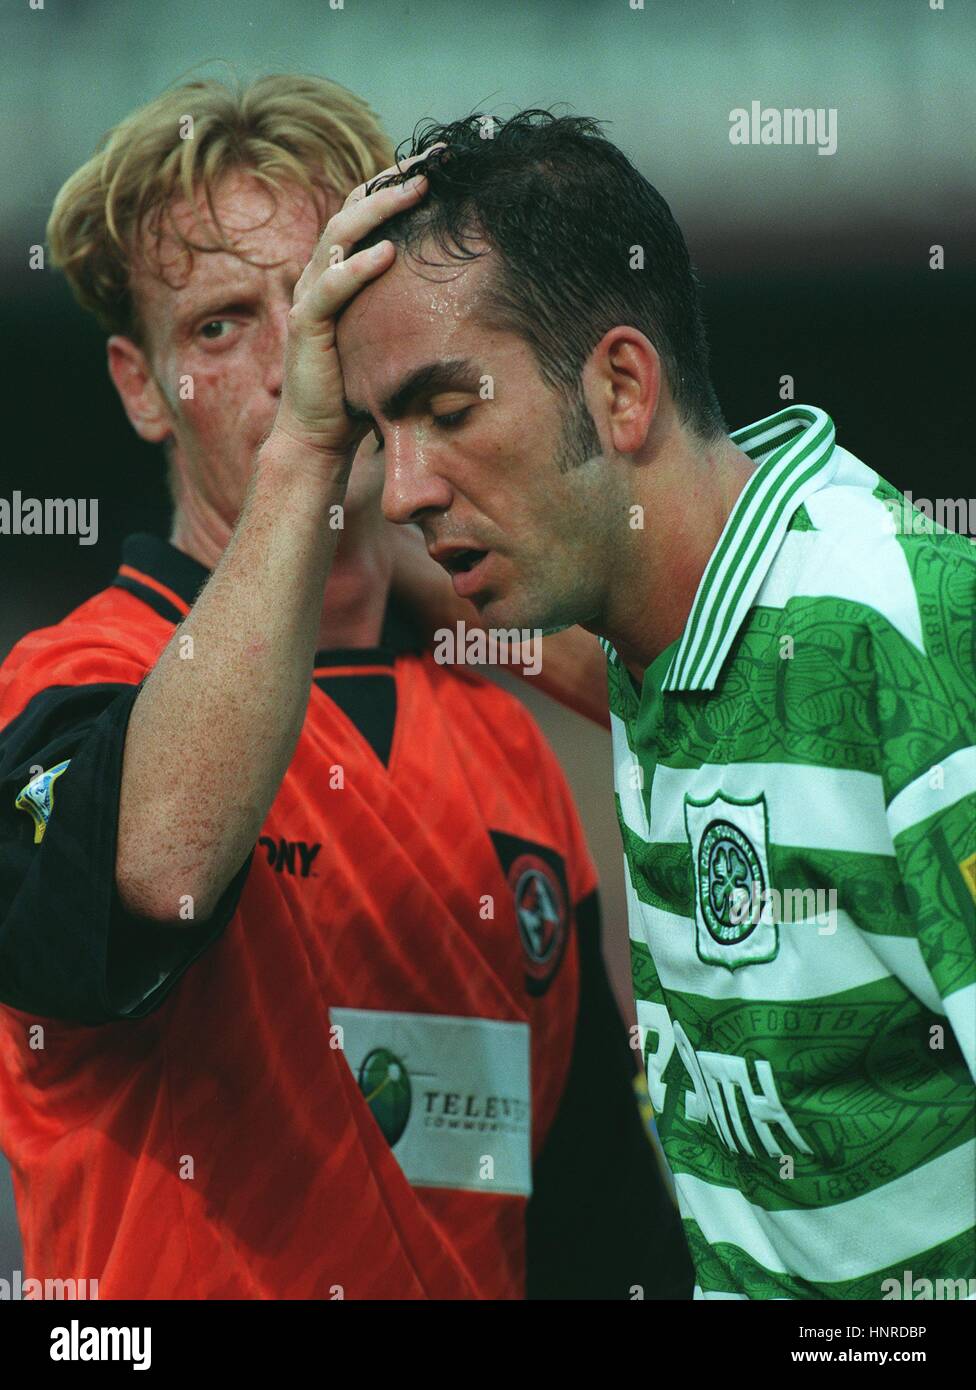 DAVID BOWMAN & PAOLO DI CANIO DUNDEE UNITED V CELTIC FC 15 September 1996 Stock Photo